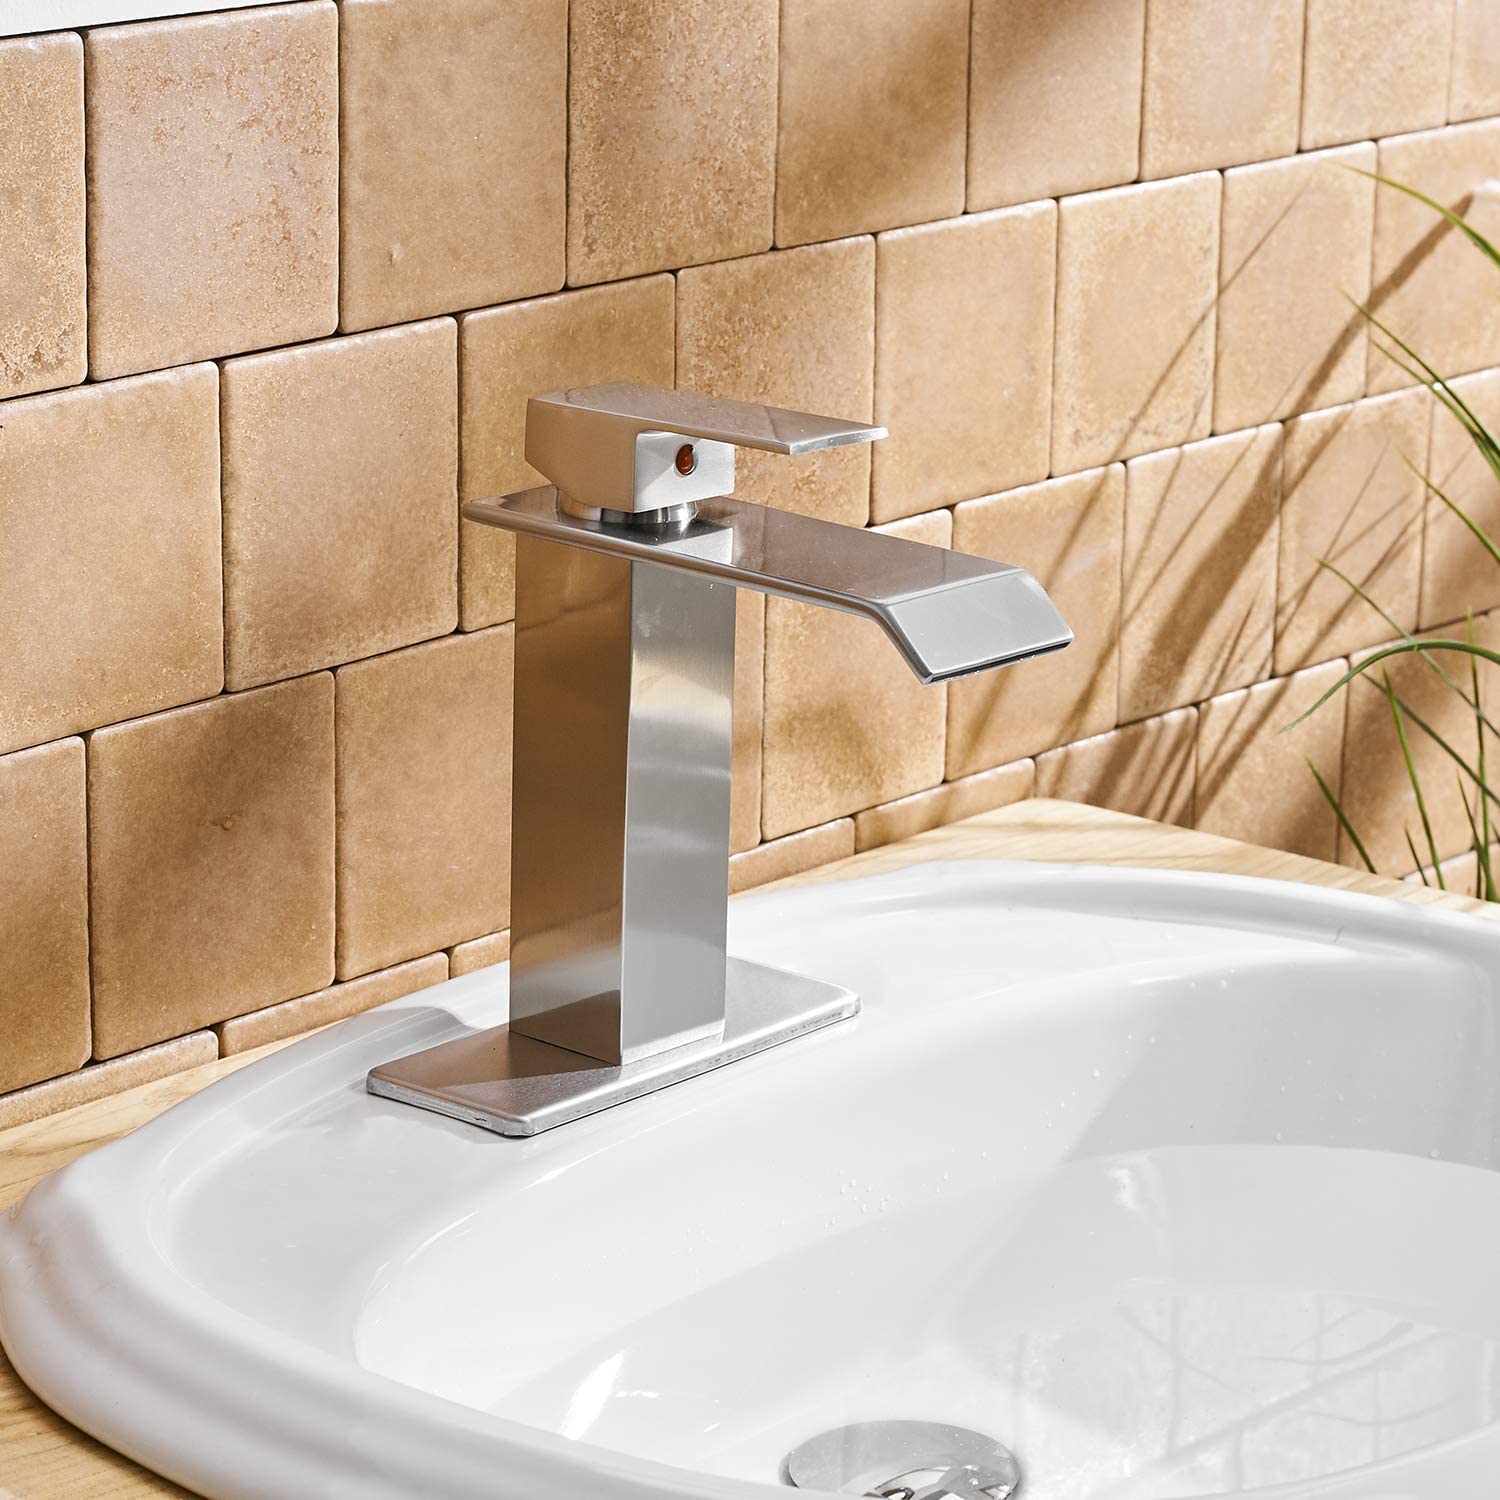 BWE Vessel Sink Faucet with Drain Assembly Without Overflow and Supply Hose Lead-Free Lavatory Waterfall Brushed Nickel Bathroom Faucet Single Handle One Hole Mixer Tap Tall Body Matte - image 3 of 16